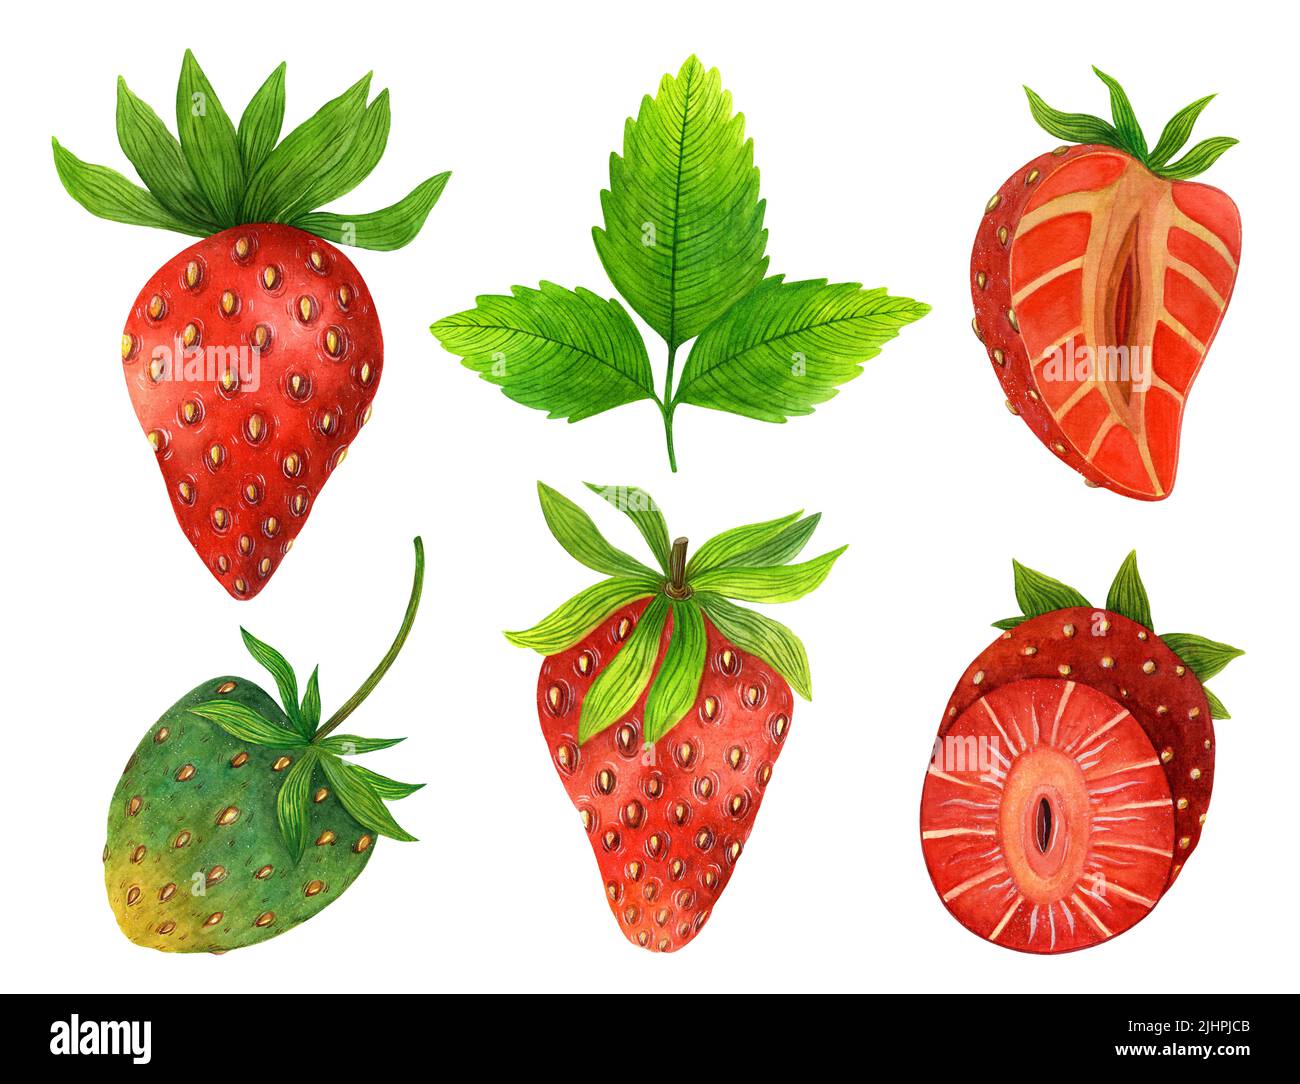 Watercolor set of fresh juicy strawberries. Red berry whole, cut in half, green unripe fruit, leaves. Hand drawn food illustration isolated on white. Stock Photo